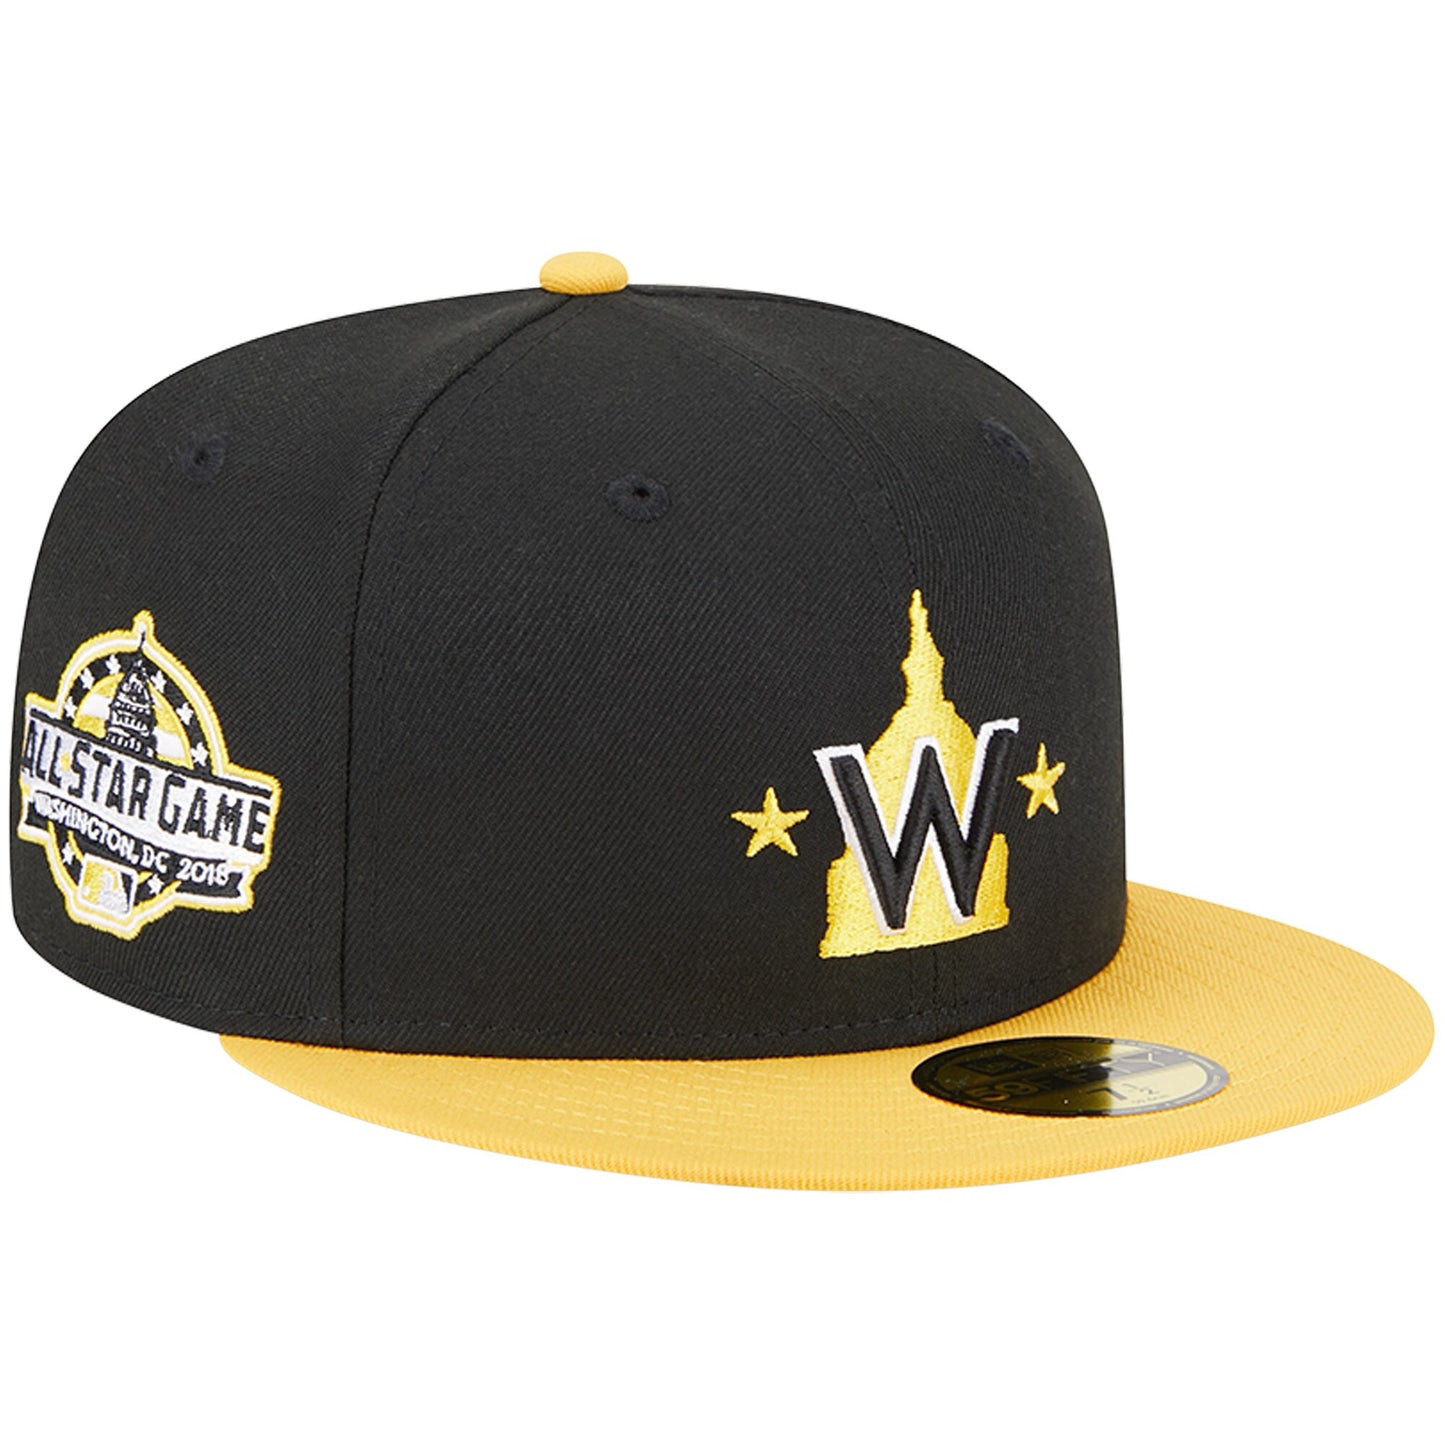 Washington Nationals New Era 59FIFTY Fitted Hat - Black/Gold